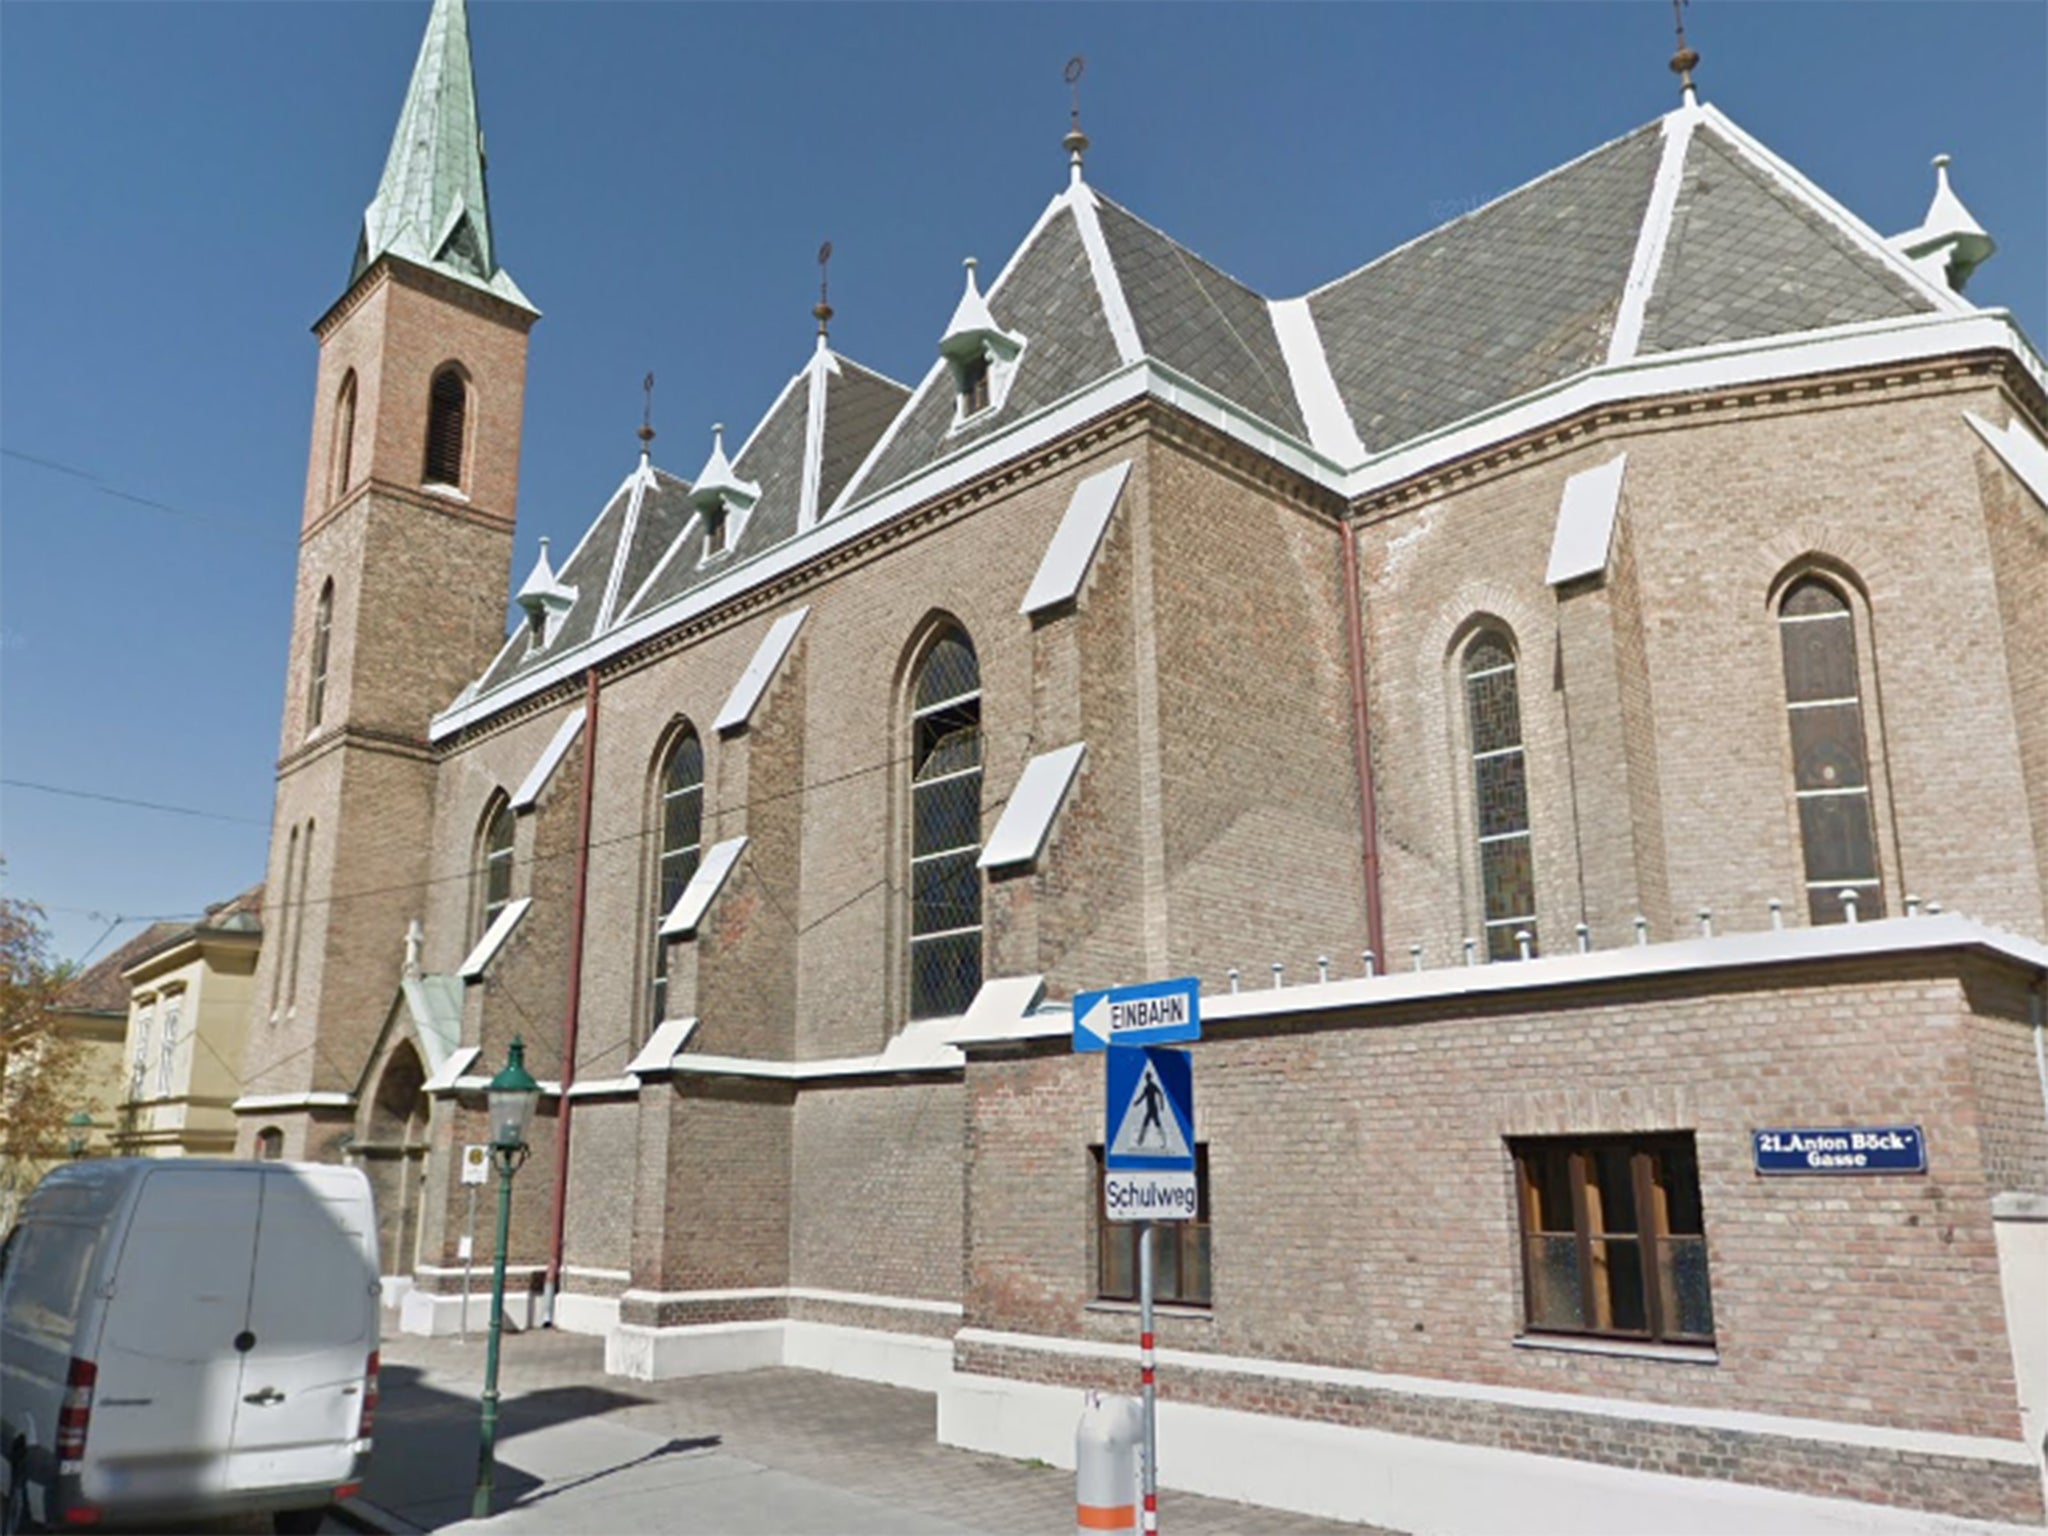 The assault happened around 1.20pm on Thursday at Maria Immaculata church in the city’s Florisdorf district